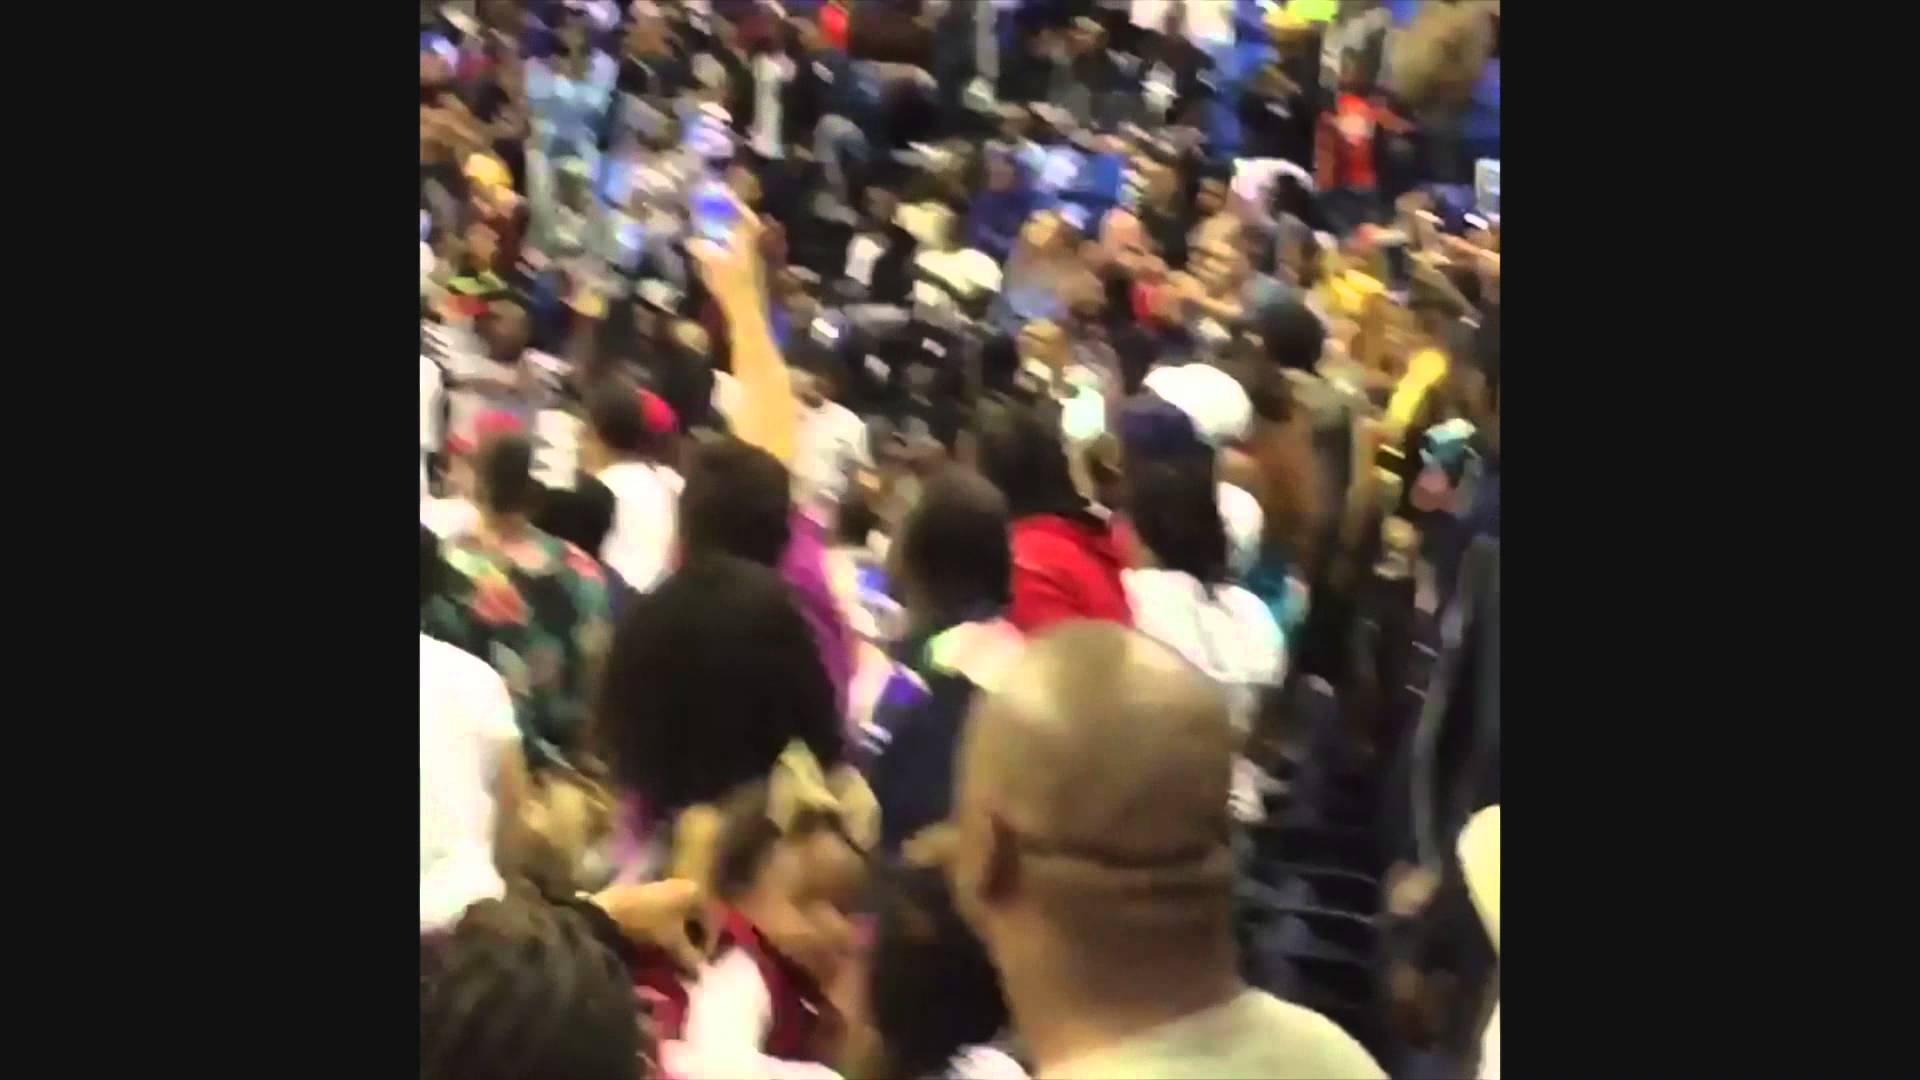 Lil' Wayne tries to fight a Basketball Referee at Charity Basketball Game